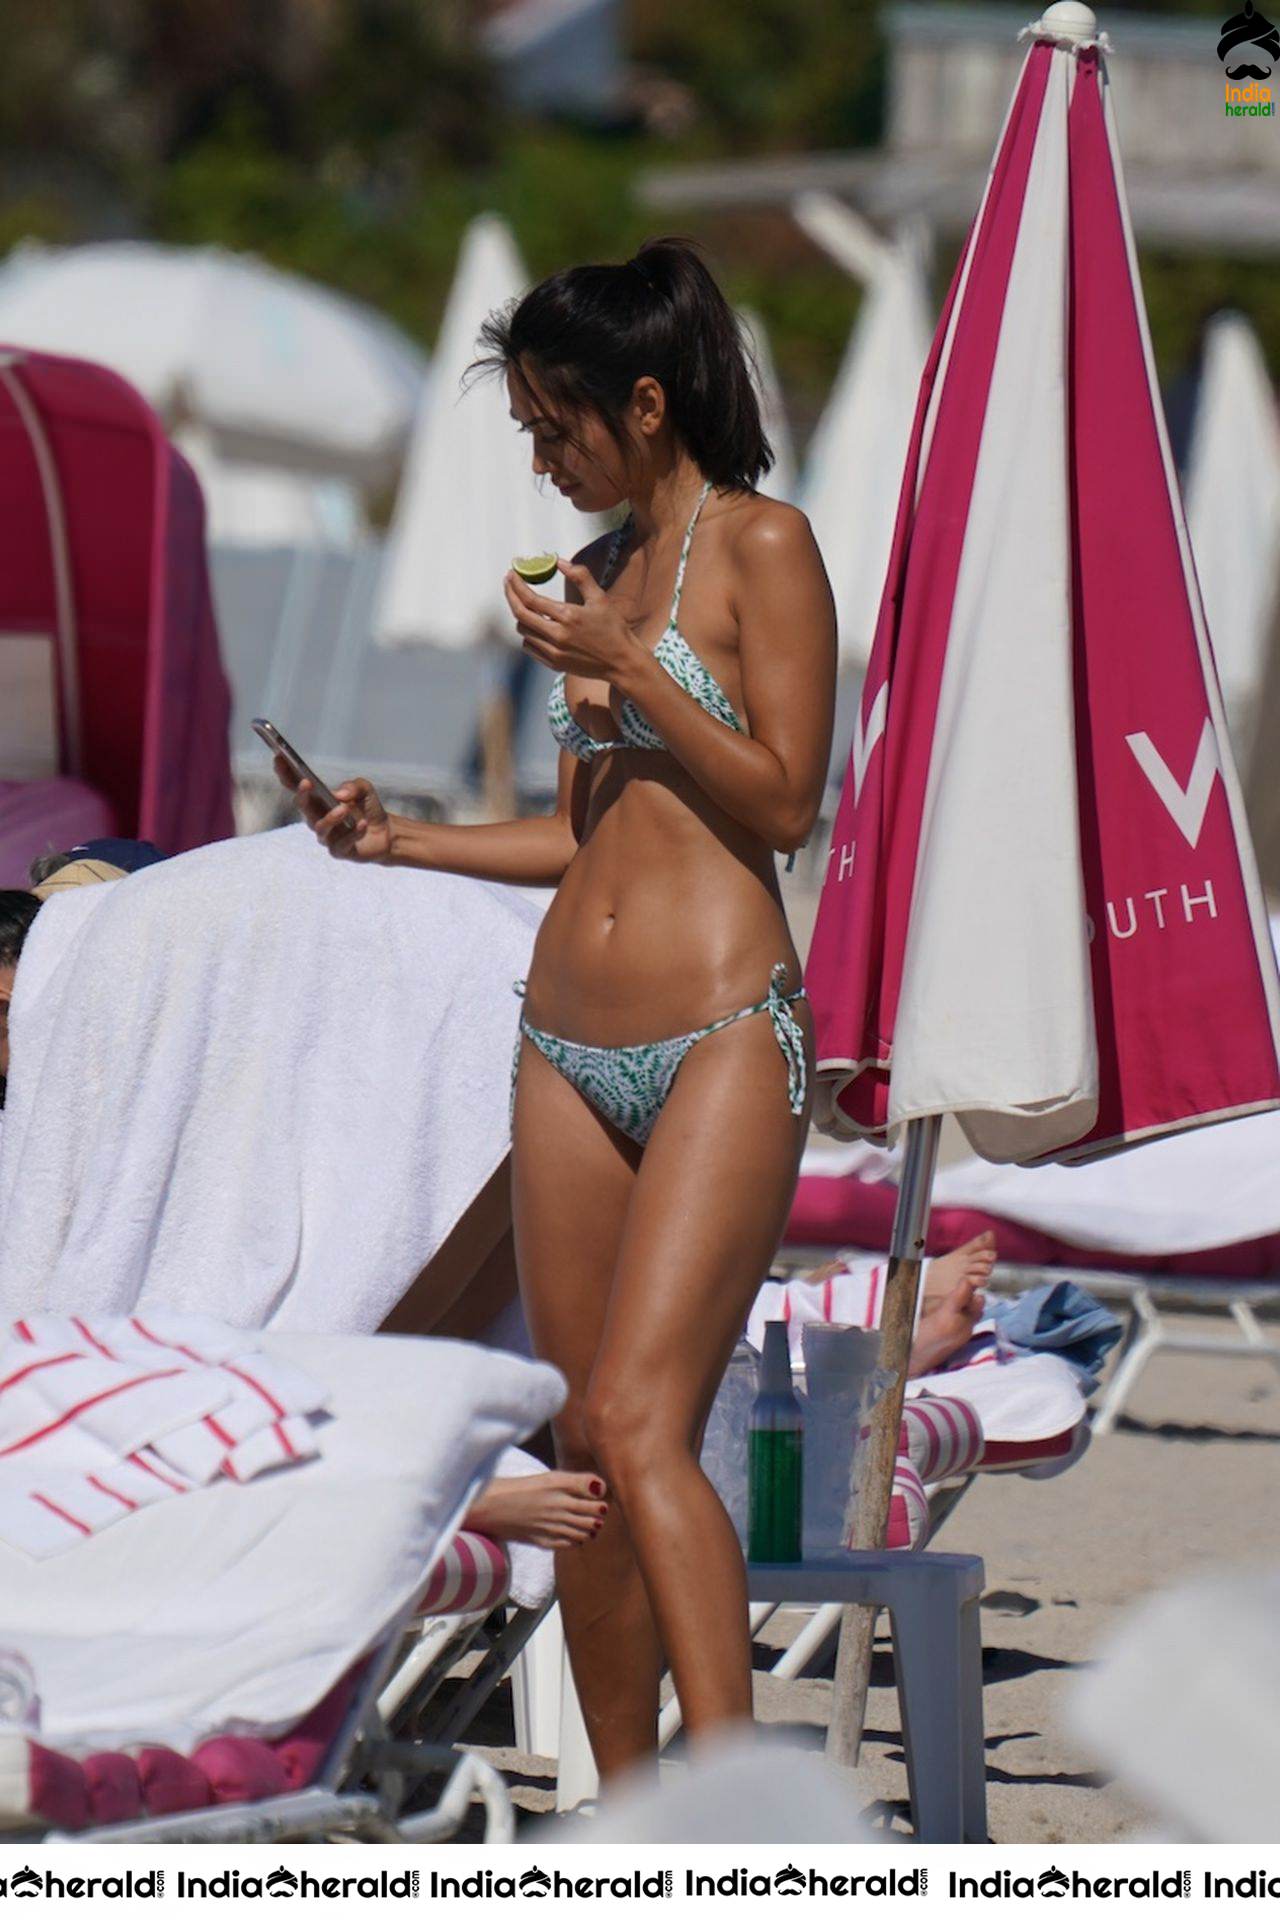 Ambra Gutierrez spotted frolicking in water with a friend in Miami Set 1